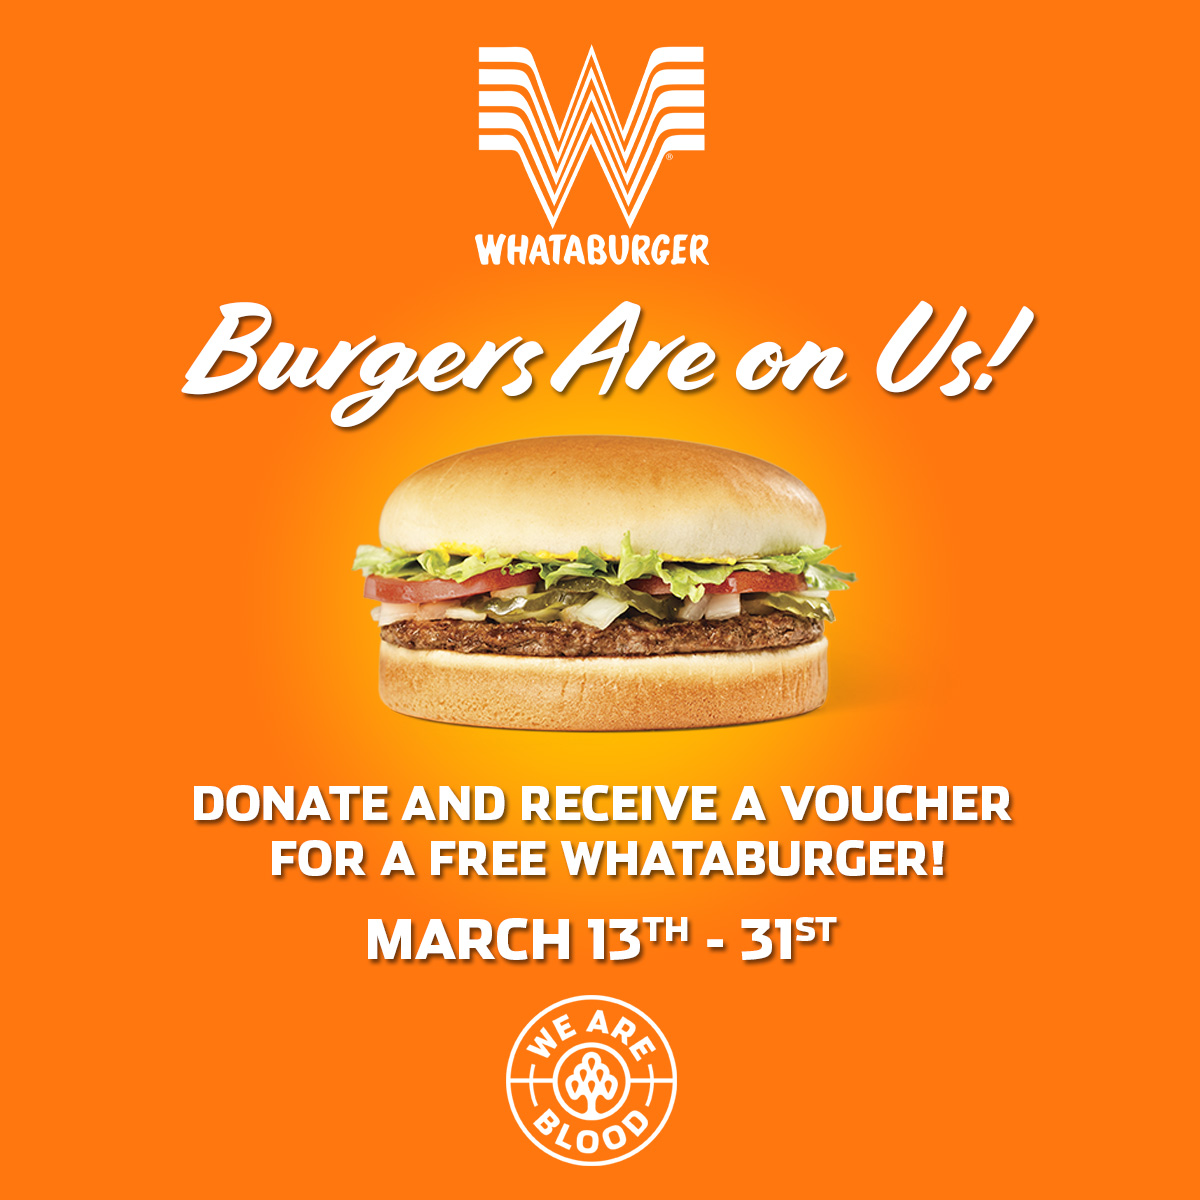 Donate Blood or Platelets at We Are Blood, Get a Free Whataburger